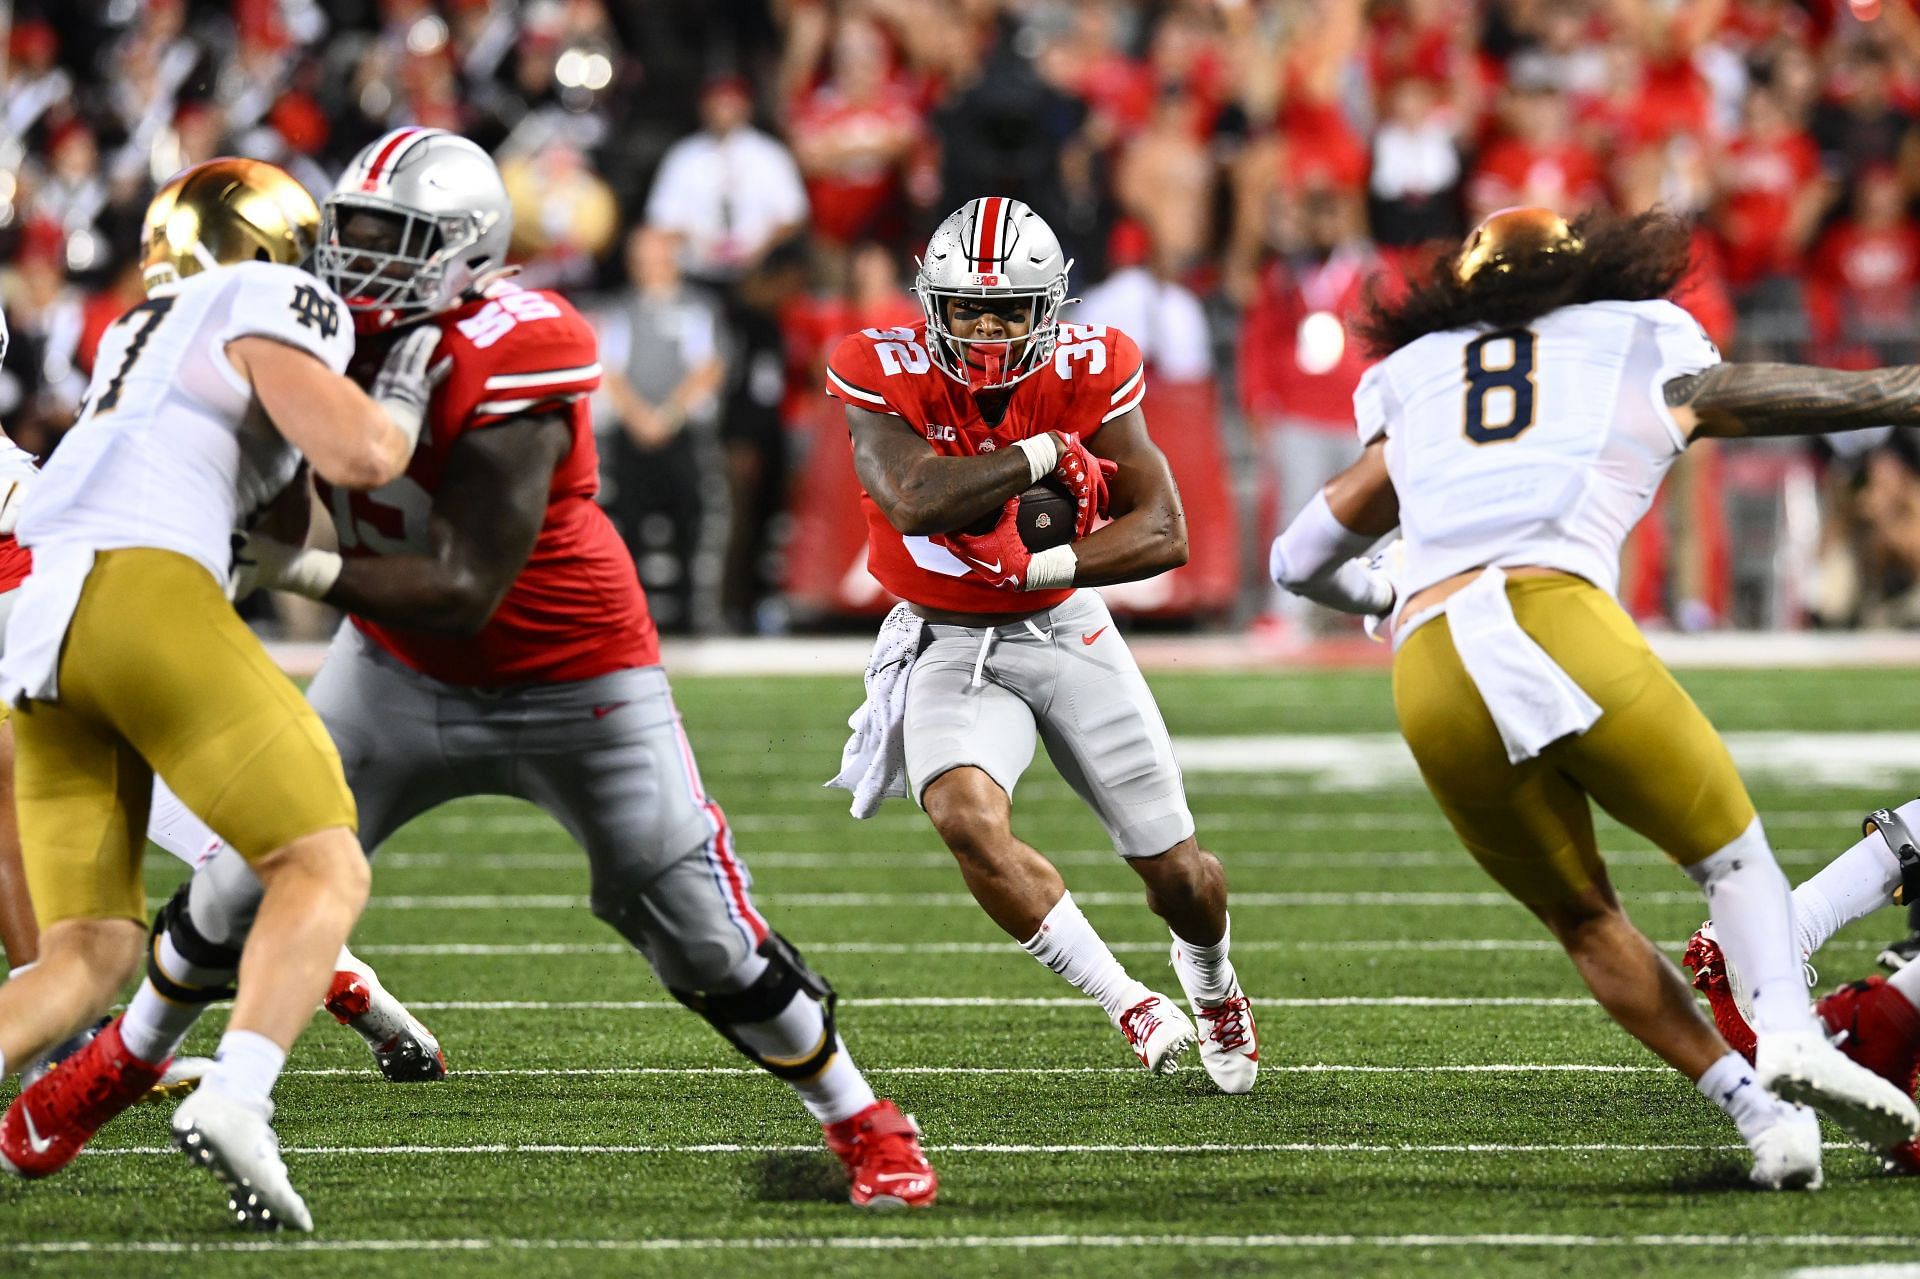 Ohio State will be a huge early-season test for the Fighting Irish.